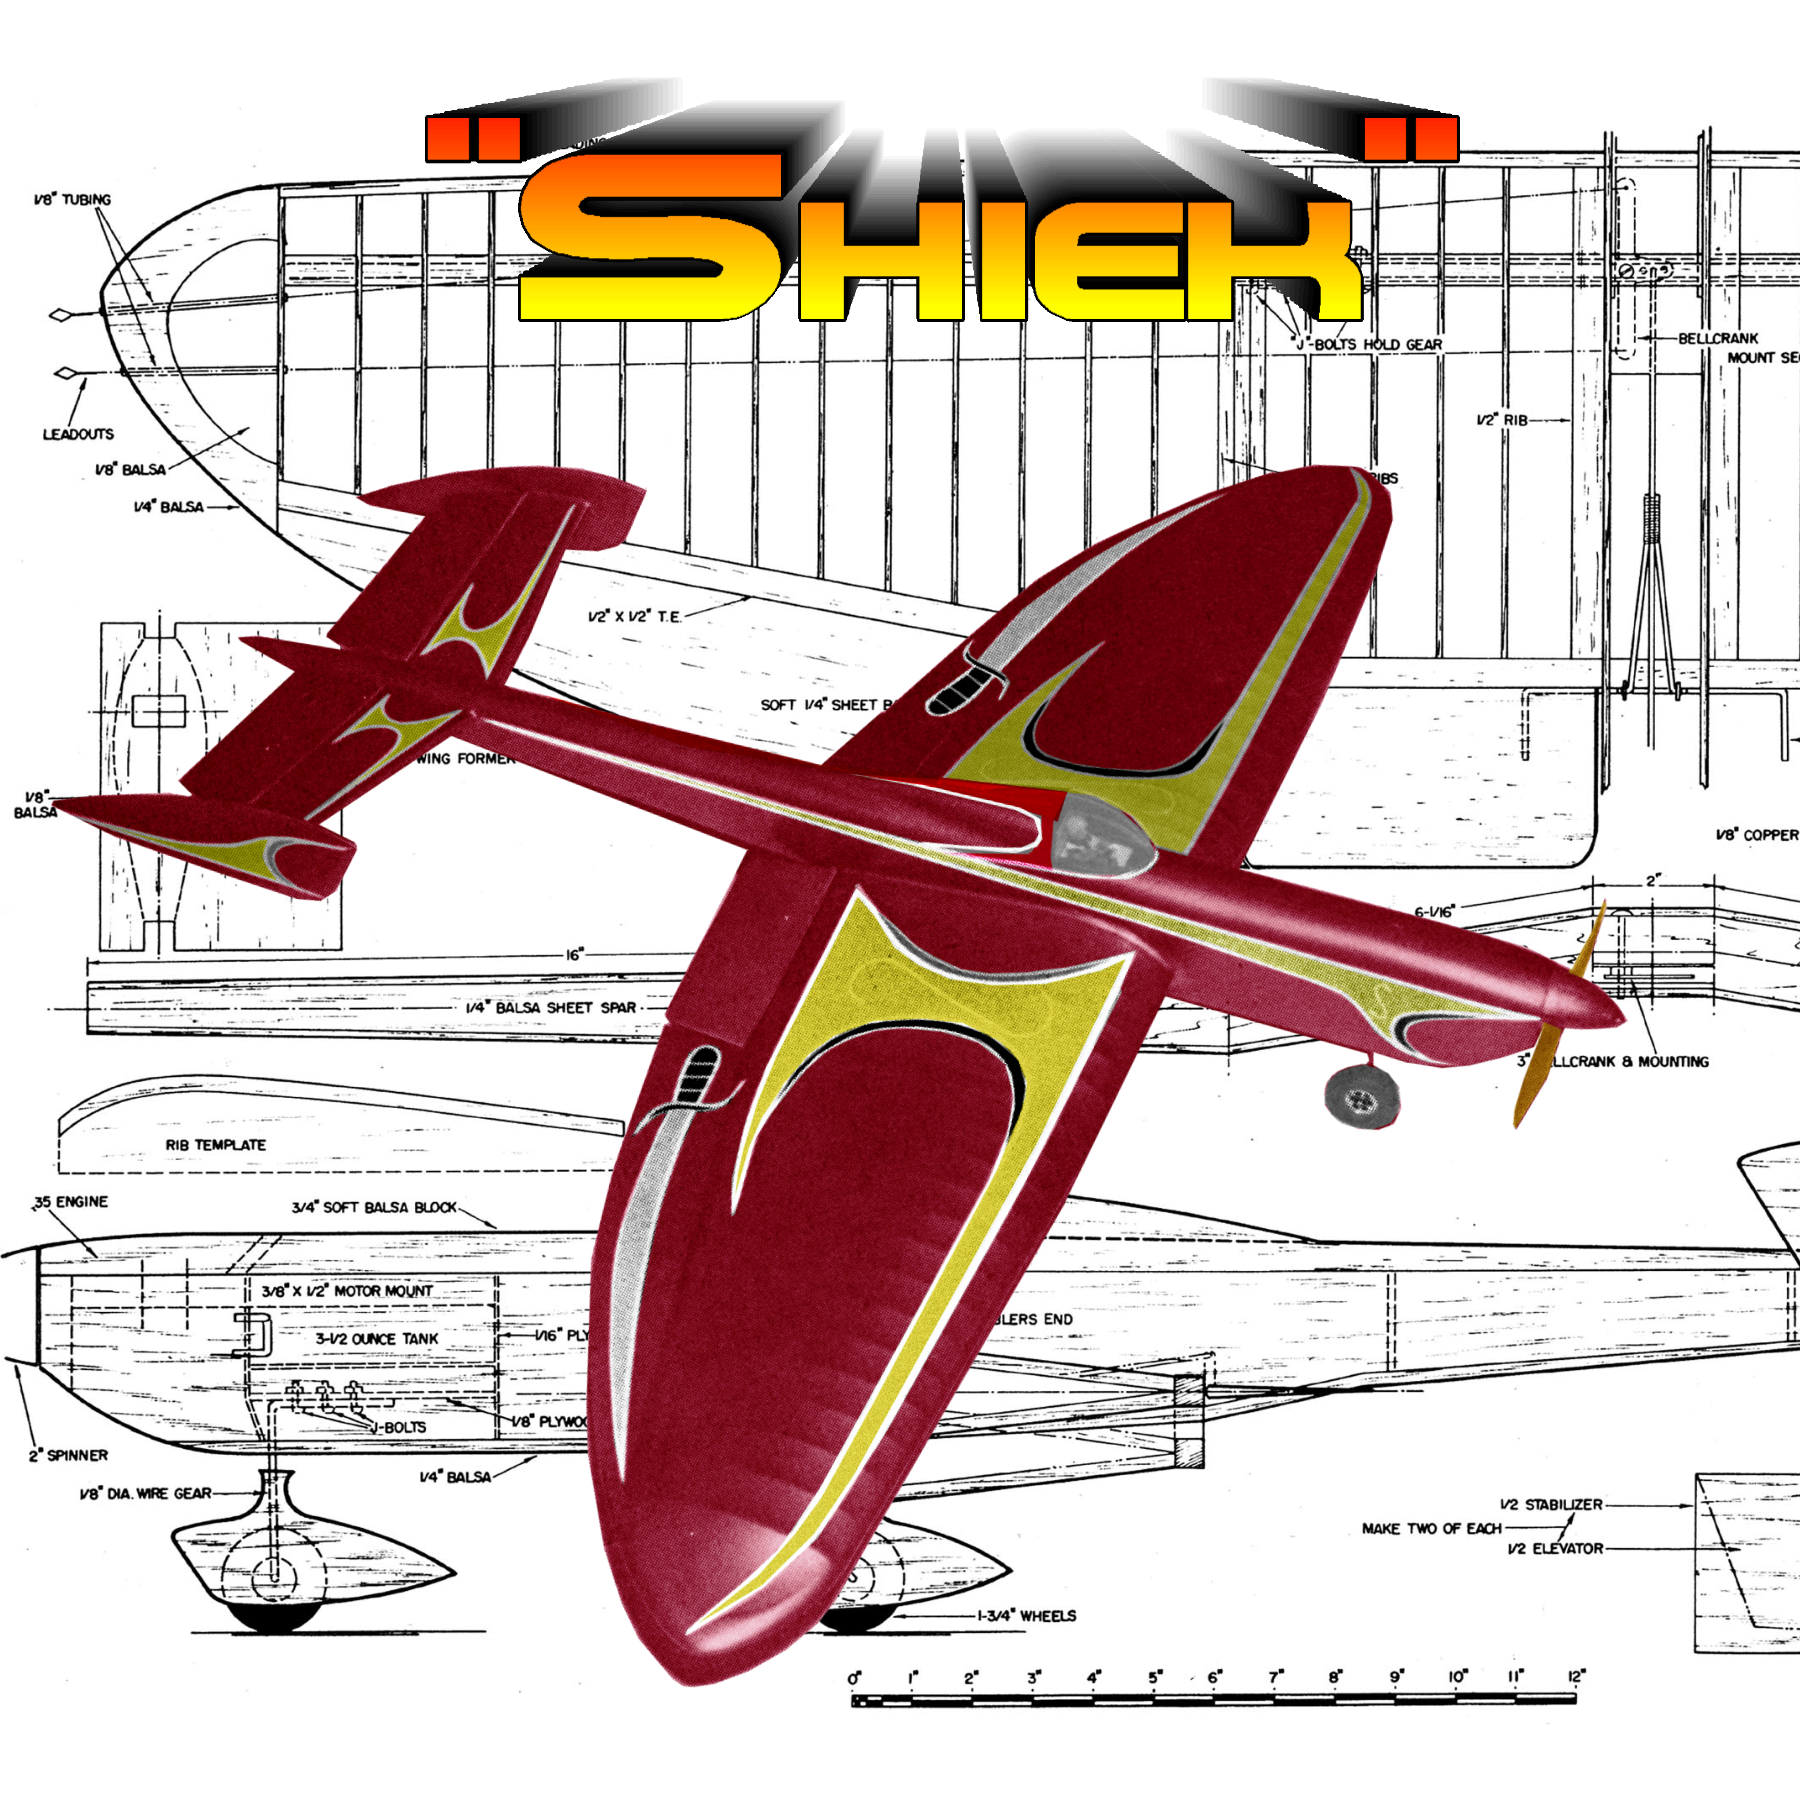 full size printed plans and article w/s 52" .35 engine shiek classic stunt